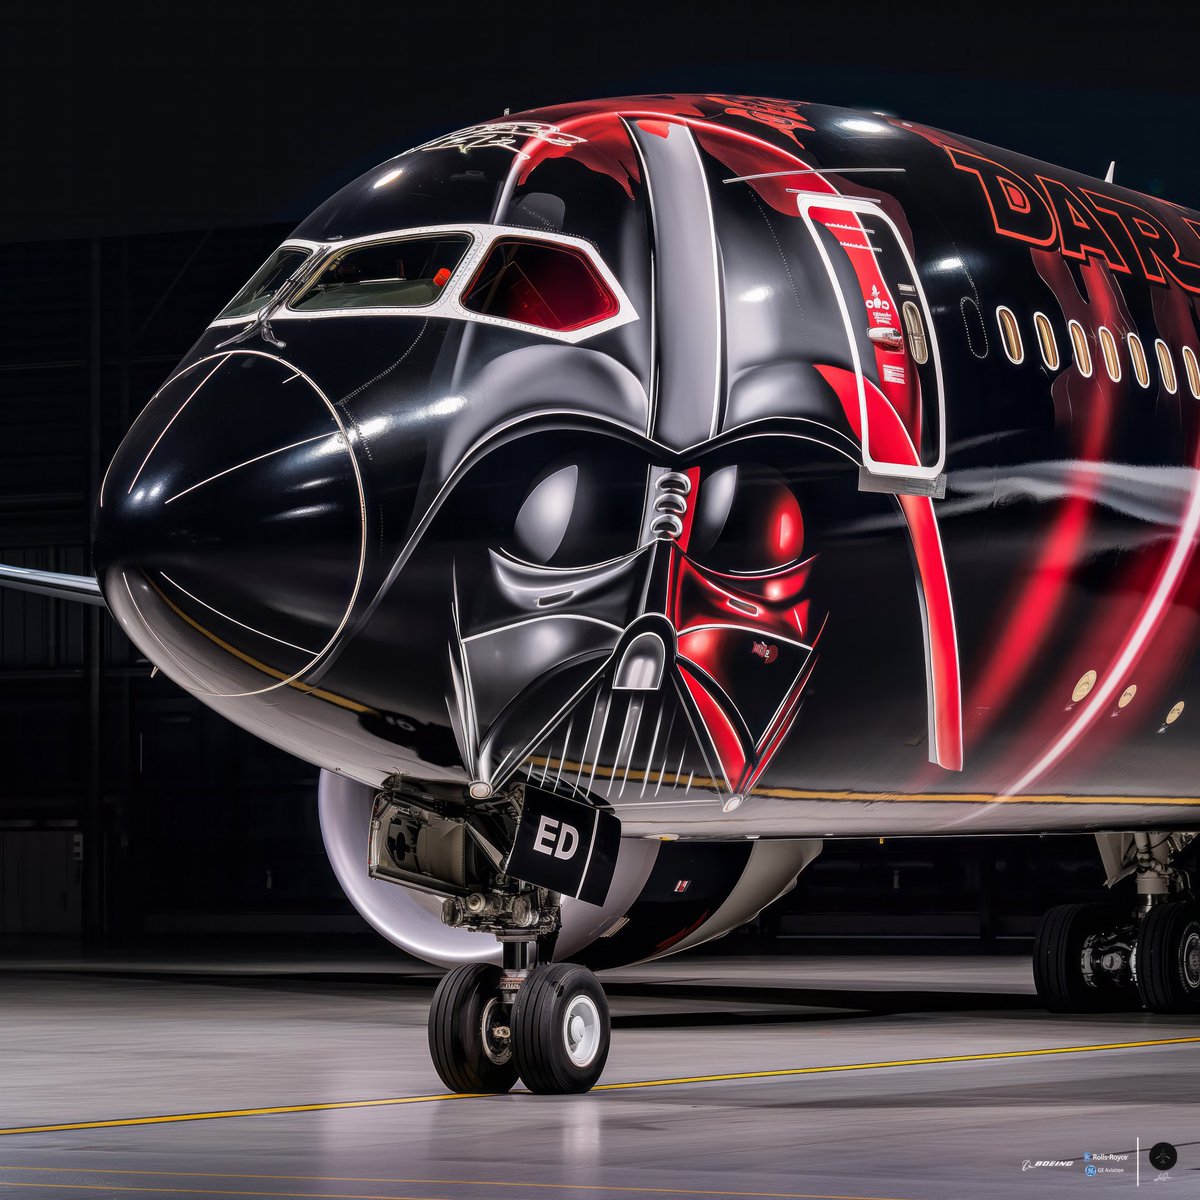 “Unleash the Force of Innovation with this AI-designed Boeing 787 Dreamliner sporting a Darth Vader Star Wars concept livery!” #aviationdaily #avporn #instagramaviation #pilot #instaaviation #planespotting #plane #aviators #instaplane #boeing #airbus #aviator #pilotlife